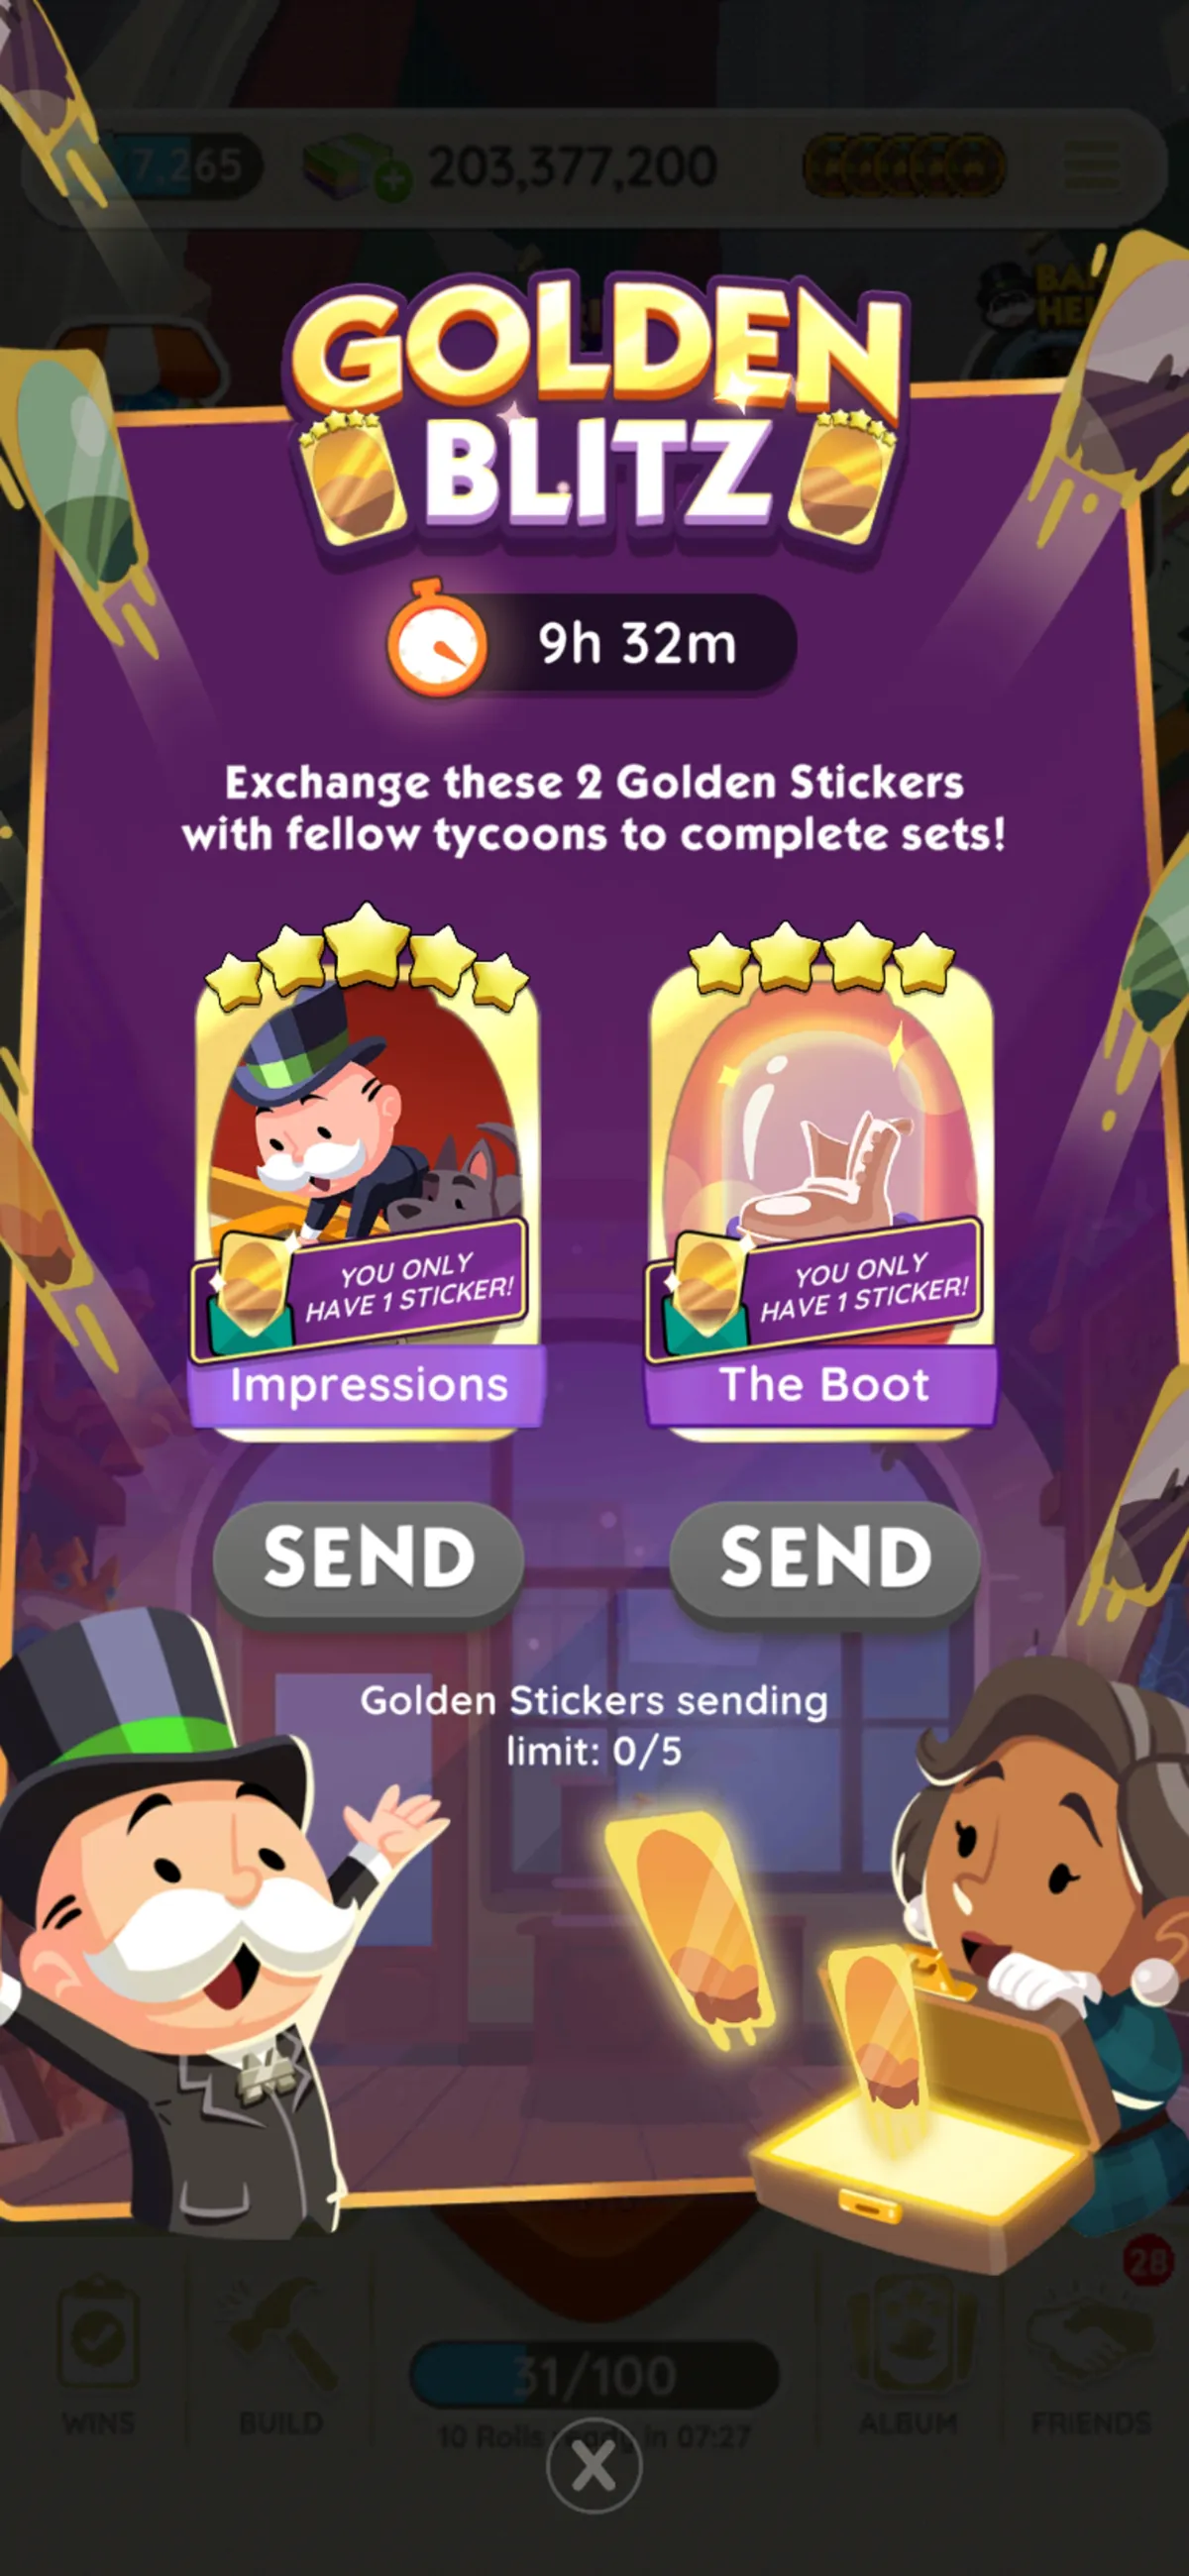 A full-sized image showing the logo for the Golden Blitz event in Monopoly GO as well as the time remaining on the event. The image is part of an article on when the next Golden Blitz will be in Monopoly GO.